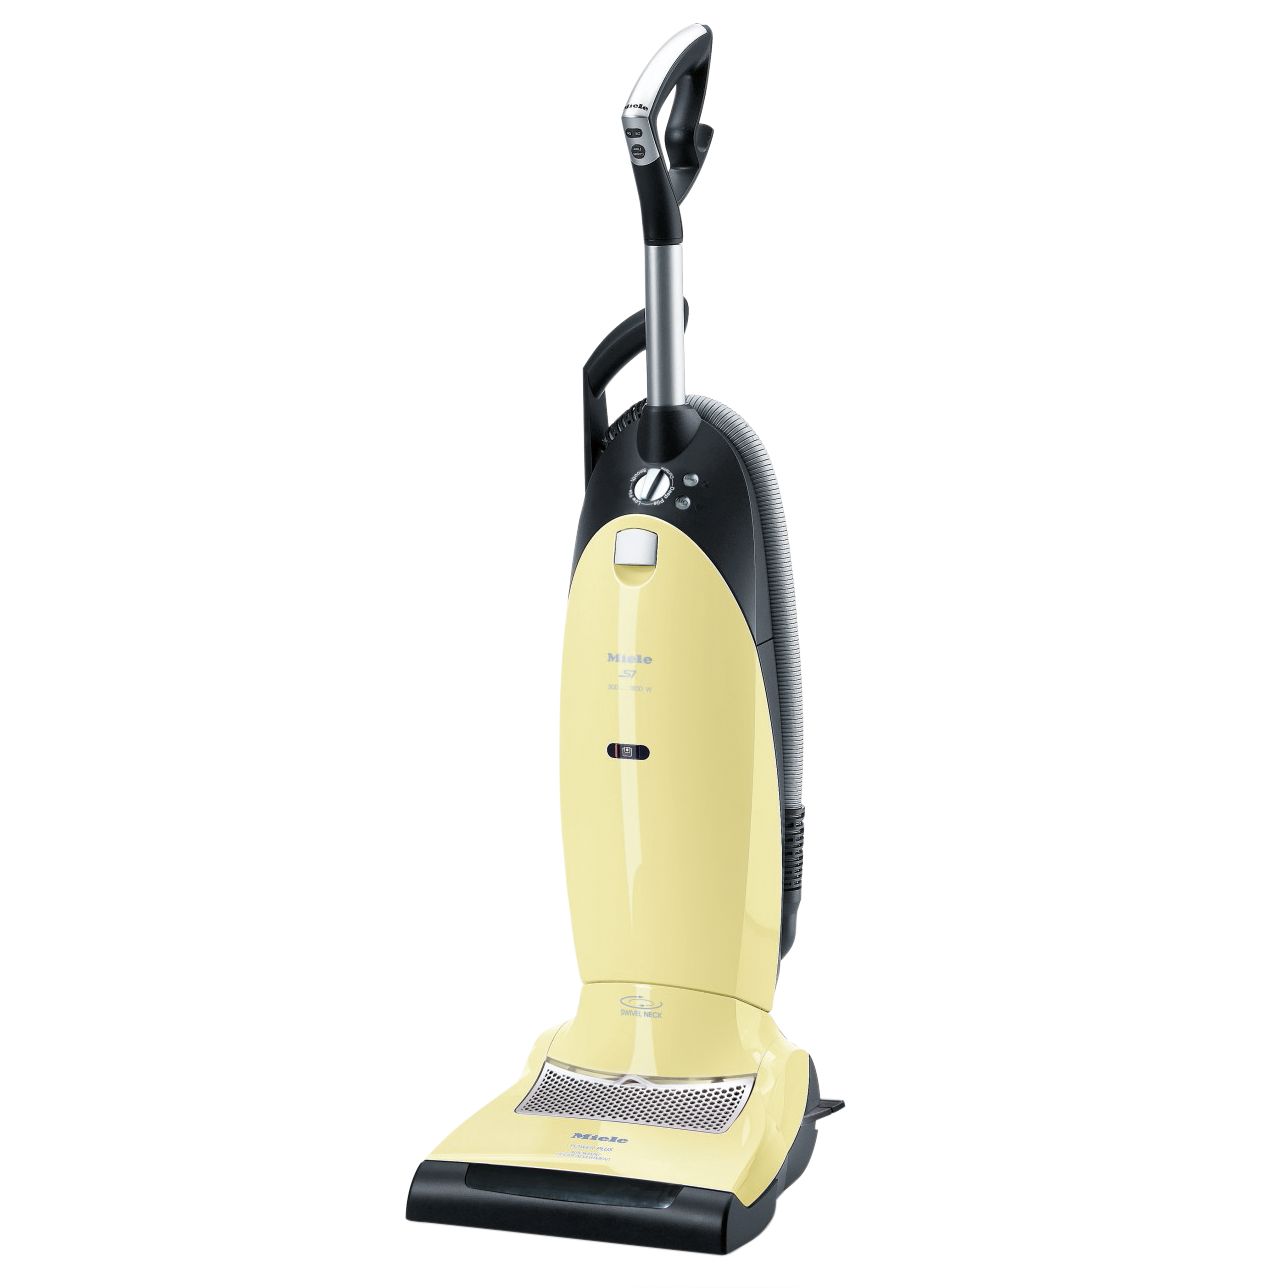 Miele S7210 Upright Cleaner, Lemon Yellow at JohnLewis